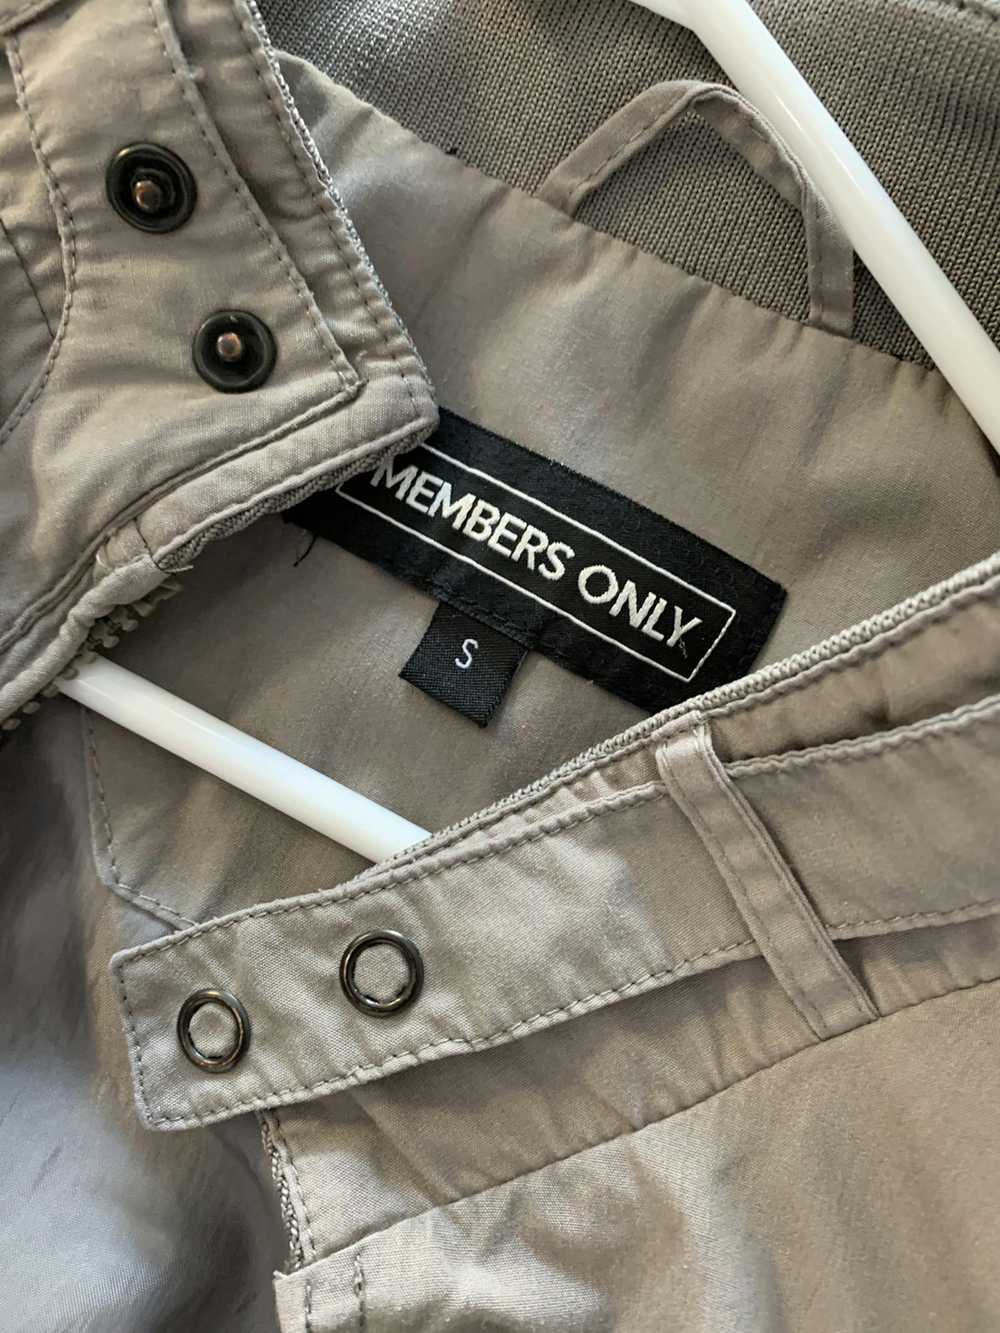 Members Only Members Only Jacket - image 2